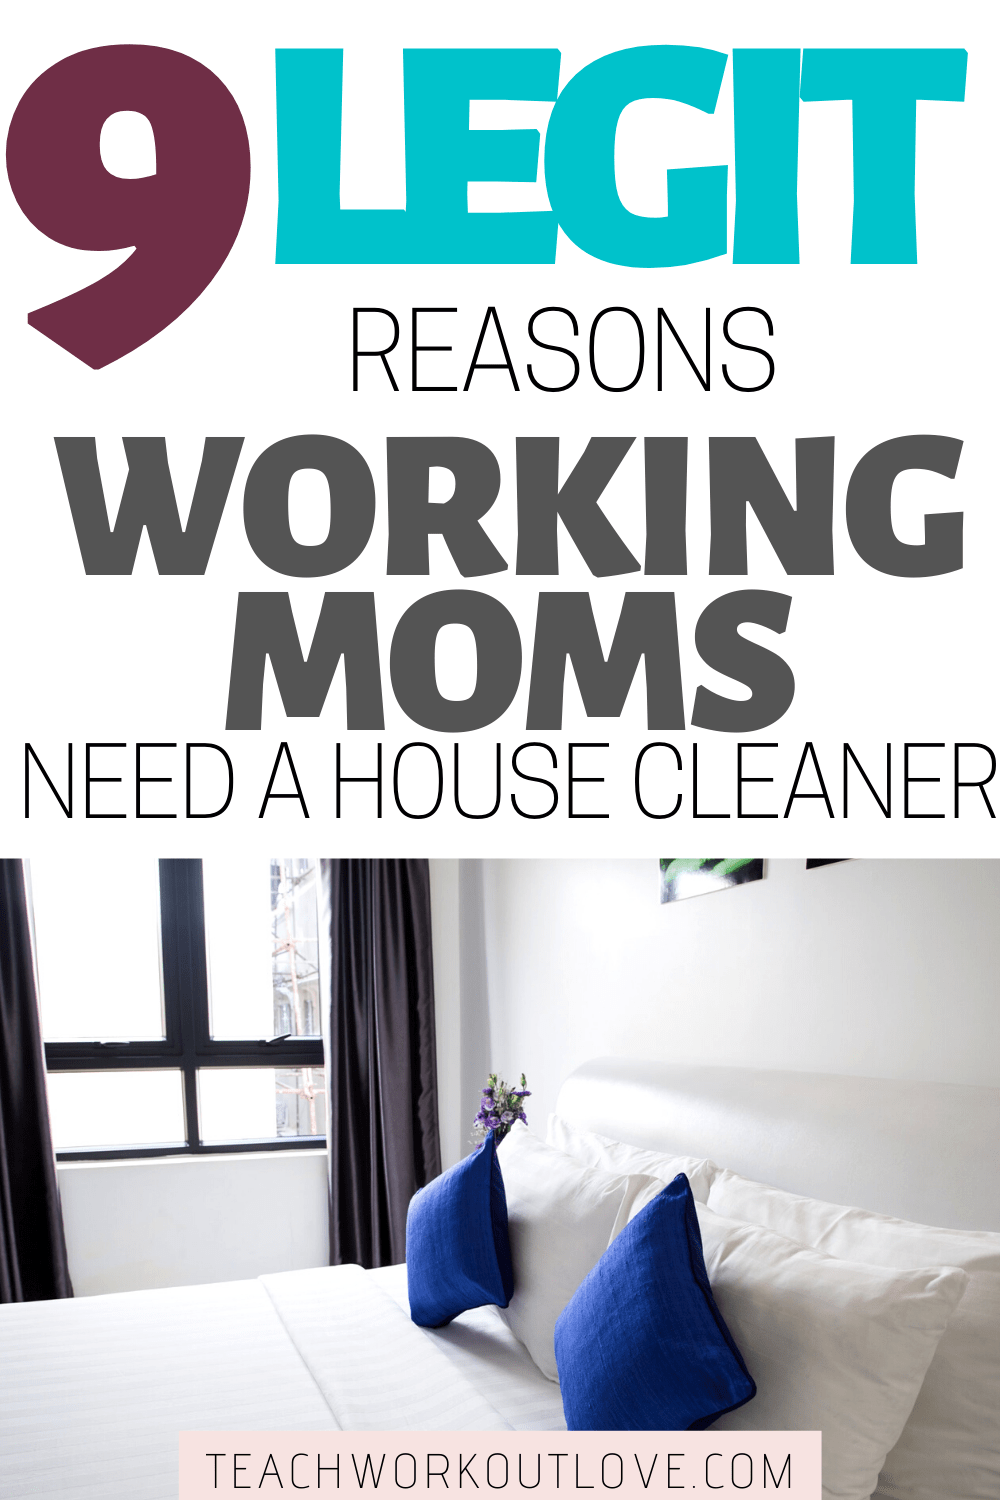 Is cleaning the house the last thing you want to do on your day off? Below are some reasons working moms should consider hiring a house cleaning service.